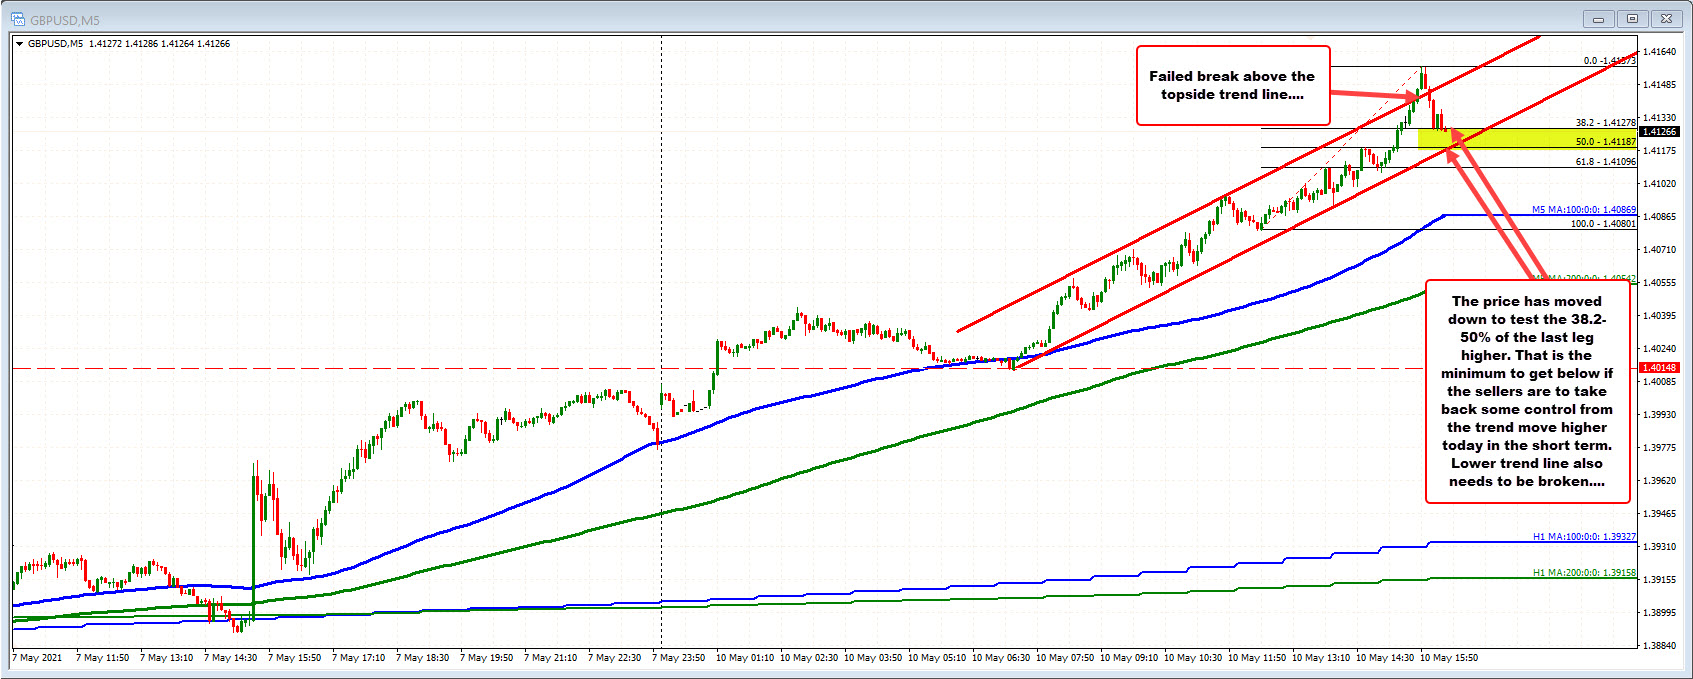 The GBPUSD on the 5 minutes chart